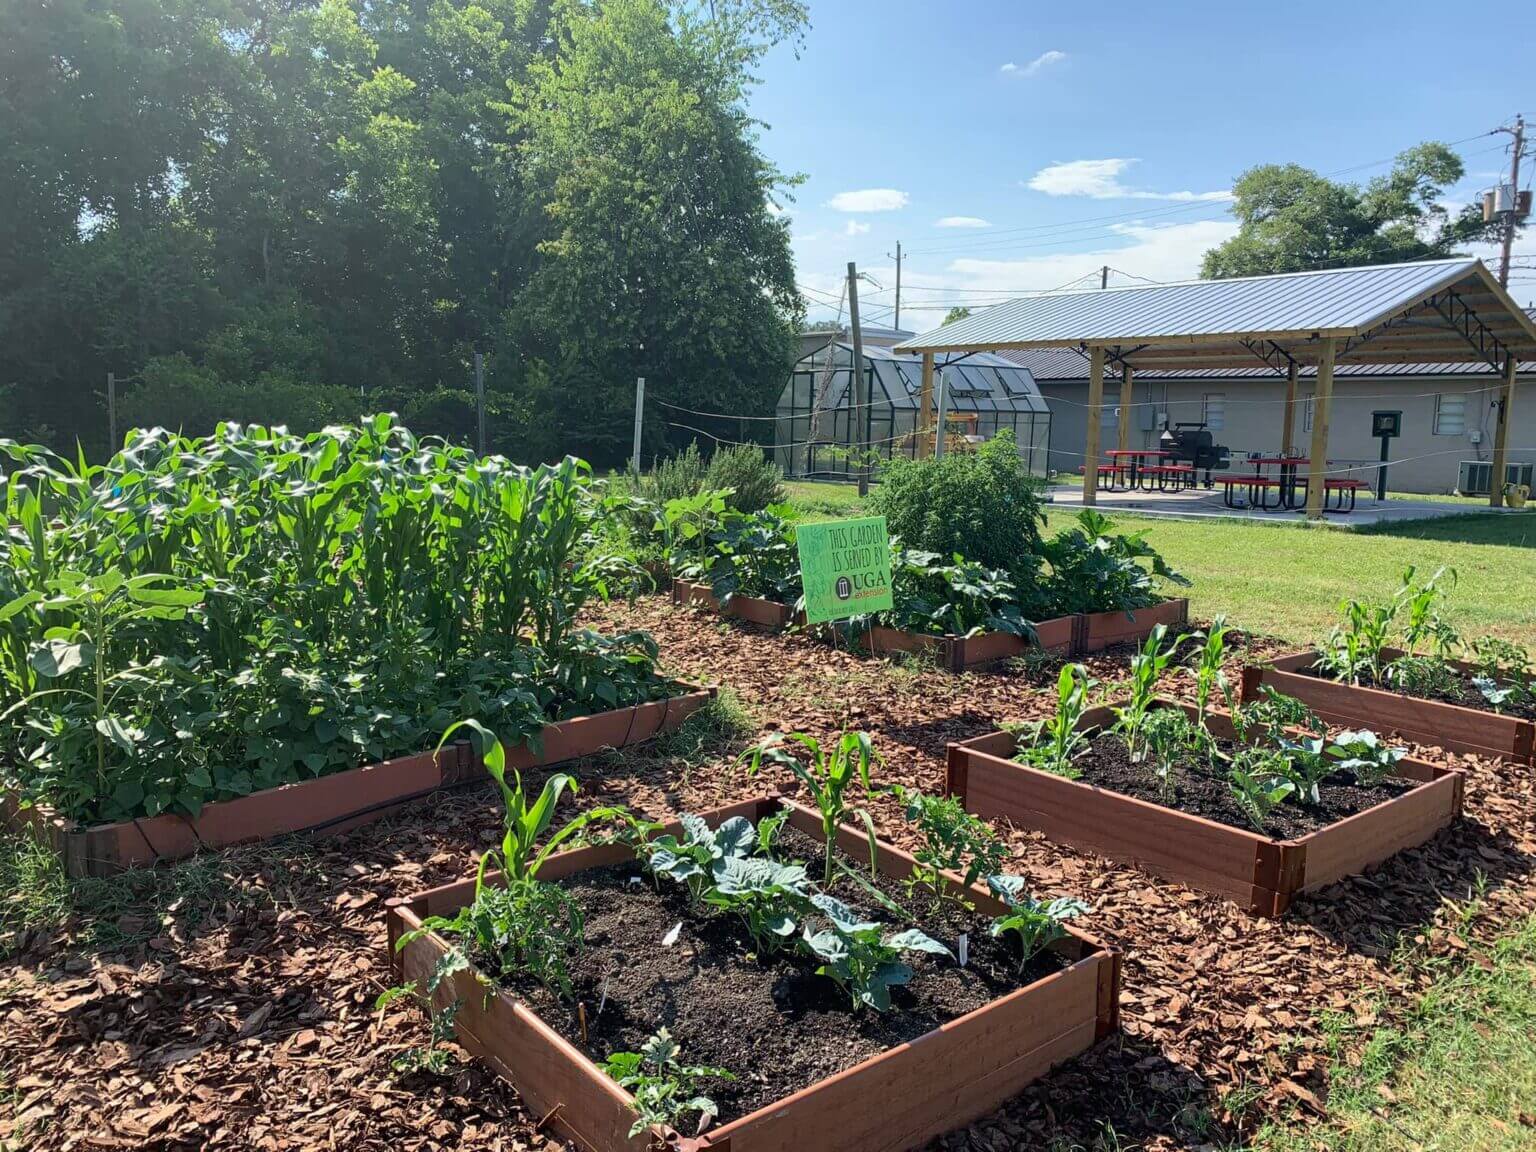 A community garden in Calhoun helps fresh provide produce. (Submitted photo)